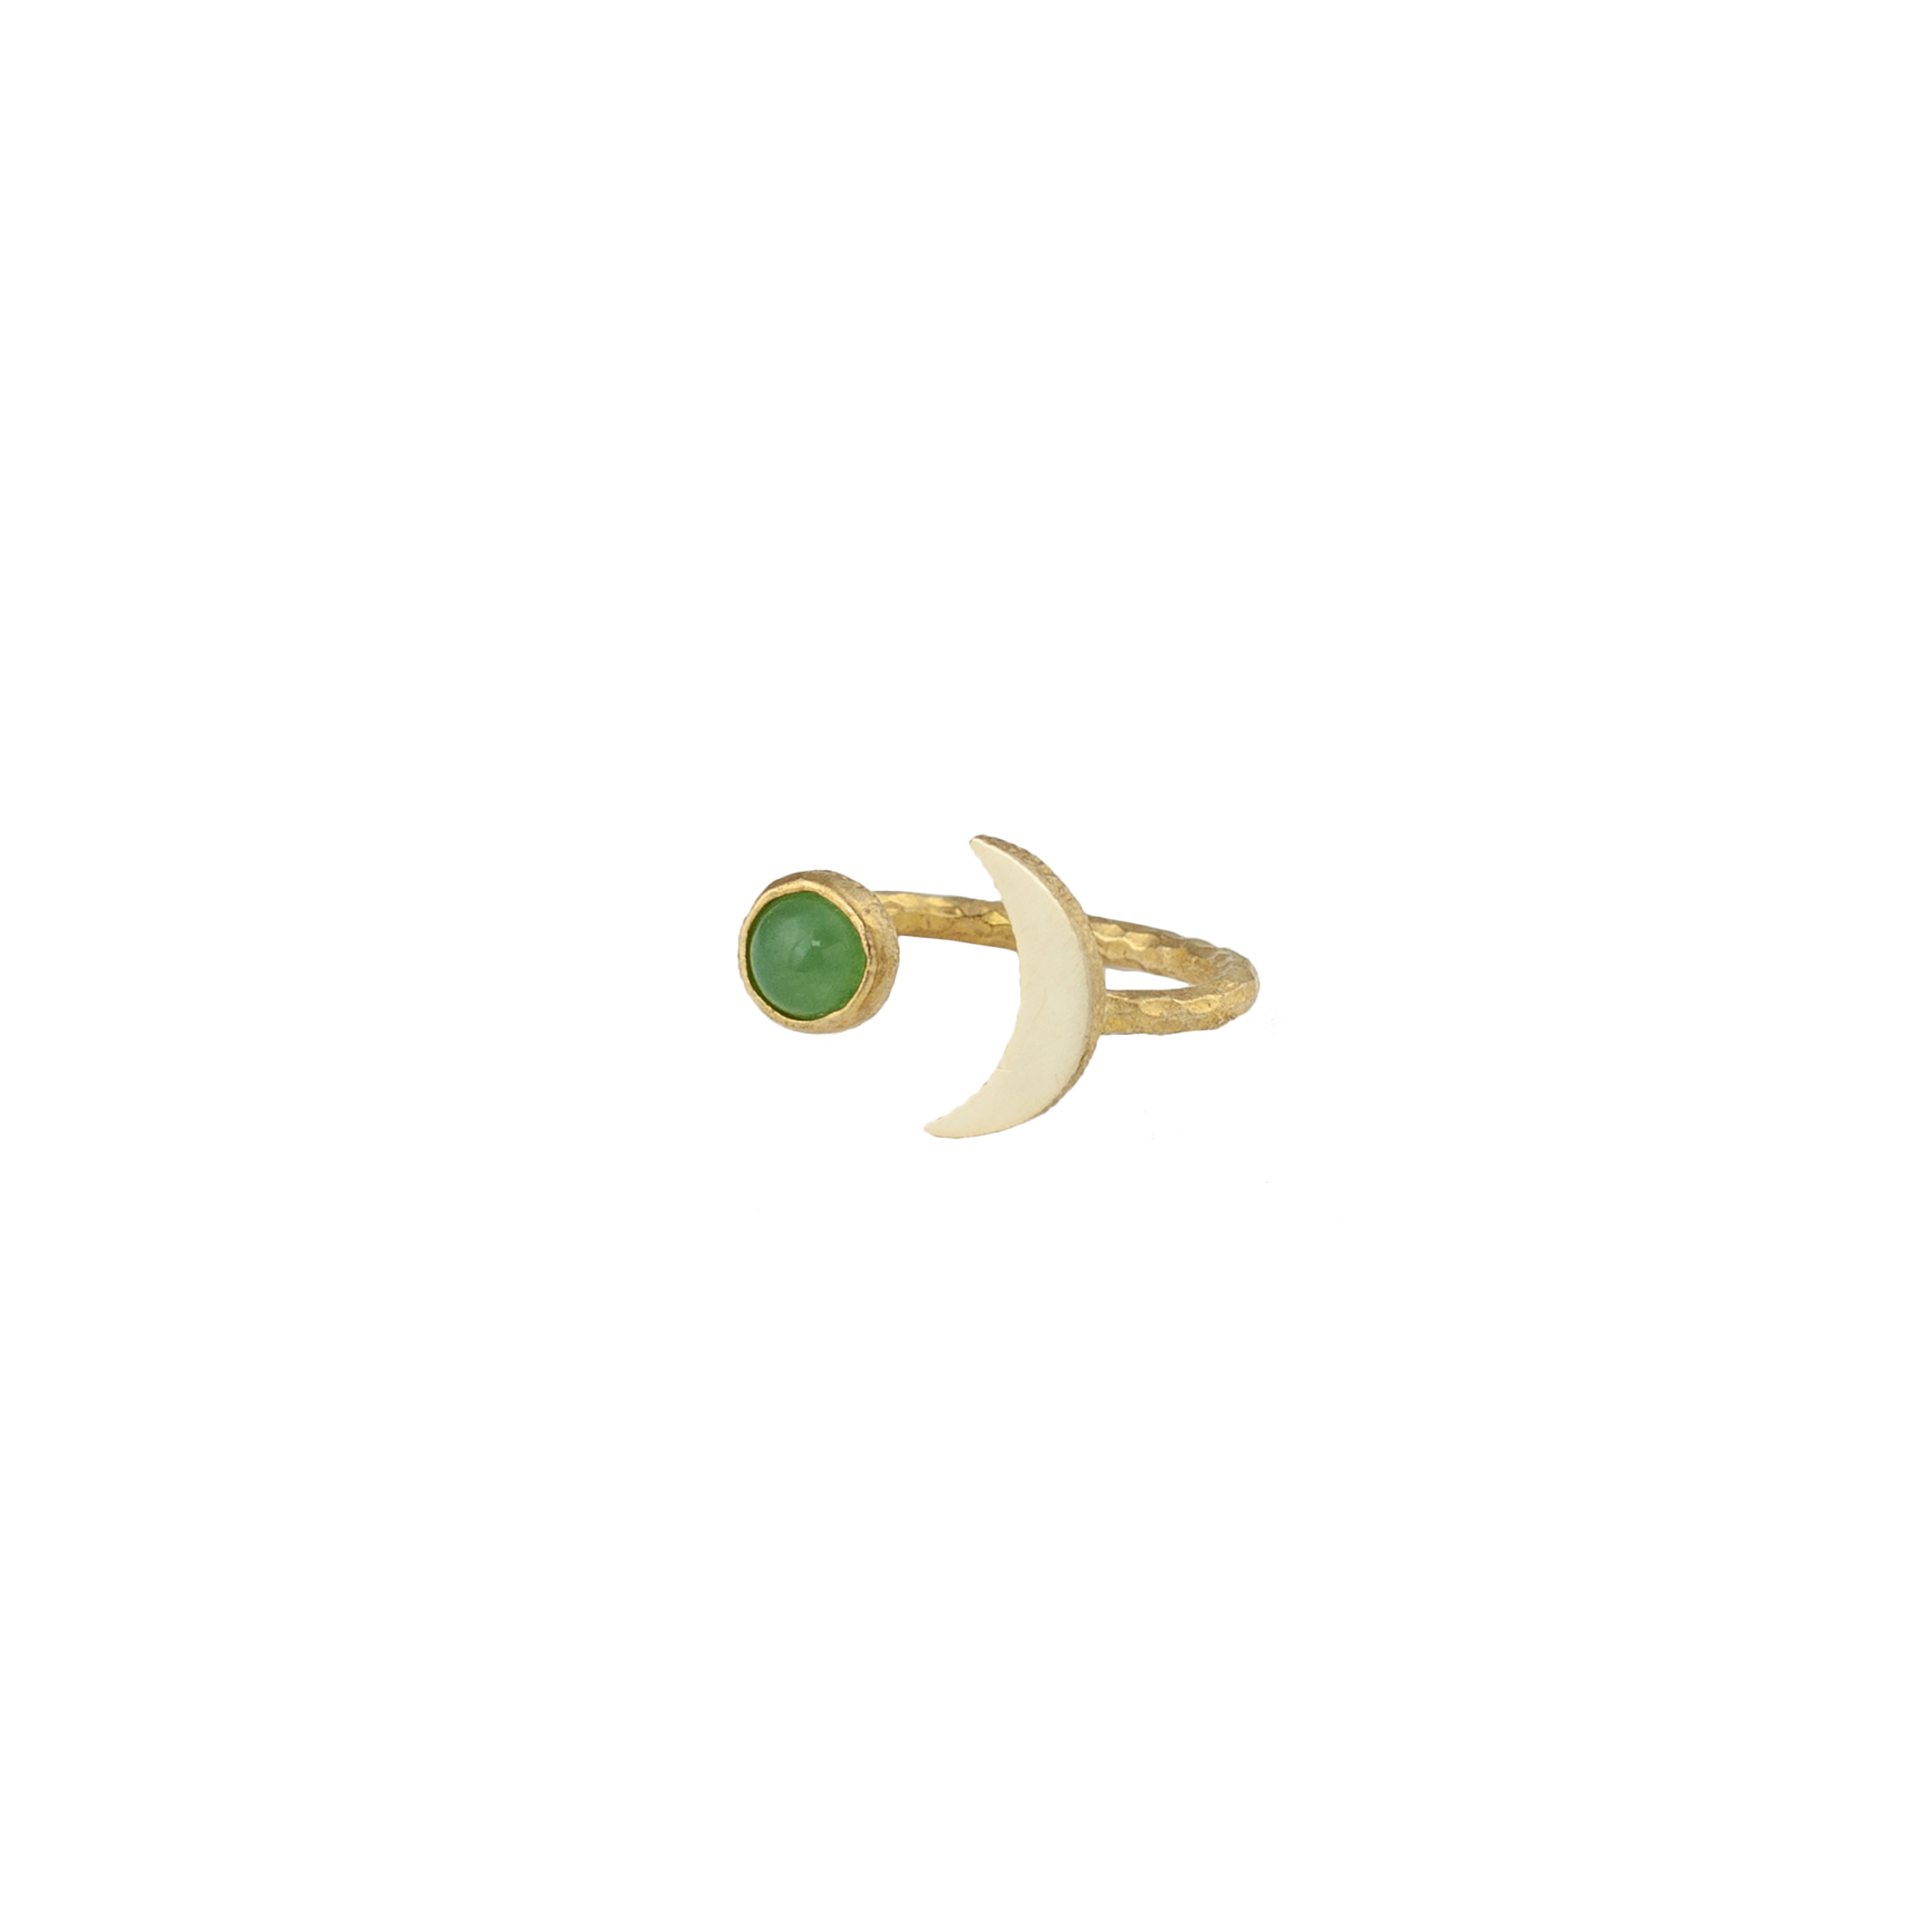 Moon shaped ring with brass and natural aventurine gemstone